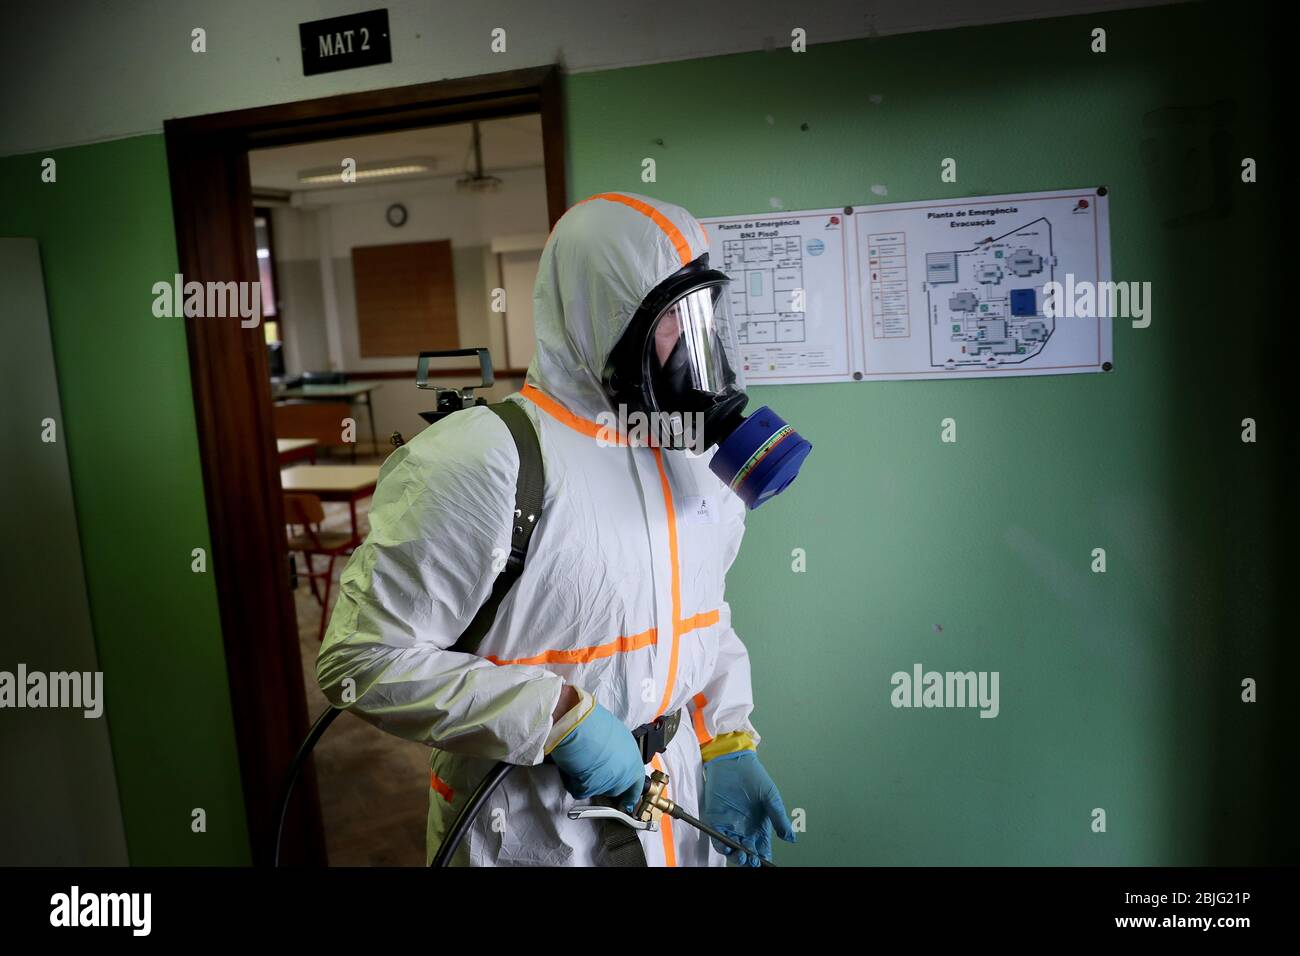 Lisbon, Portugal. 29th Apr, 2020. A Portuguese Soldier wearing protective gear disinfects a high school as the spread of the COVID-19 coronavirus disease continues, in Lisbon, Portugal on April 29, 2020. As Portugal's state of emergency will end on May 2 and the Government expected to reopen high schools in mid-May, more than 400 members of the country's armed forces are carrying out the disinfection of schools. Credit: Pedro Fiuza/ZUMA Wire/Alamy Live News Stock Photo